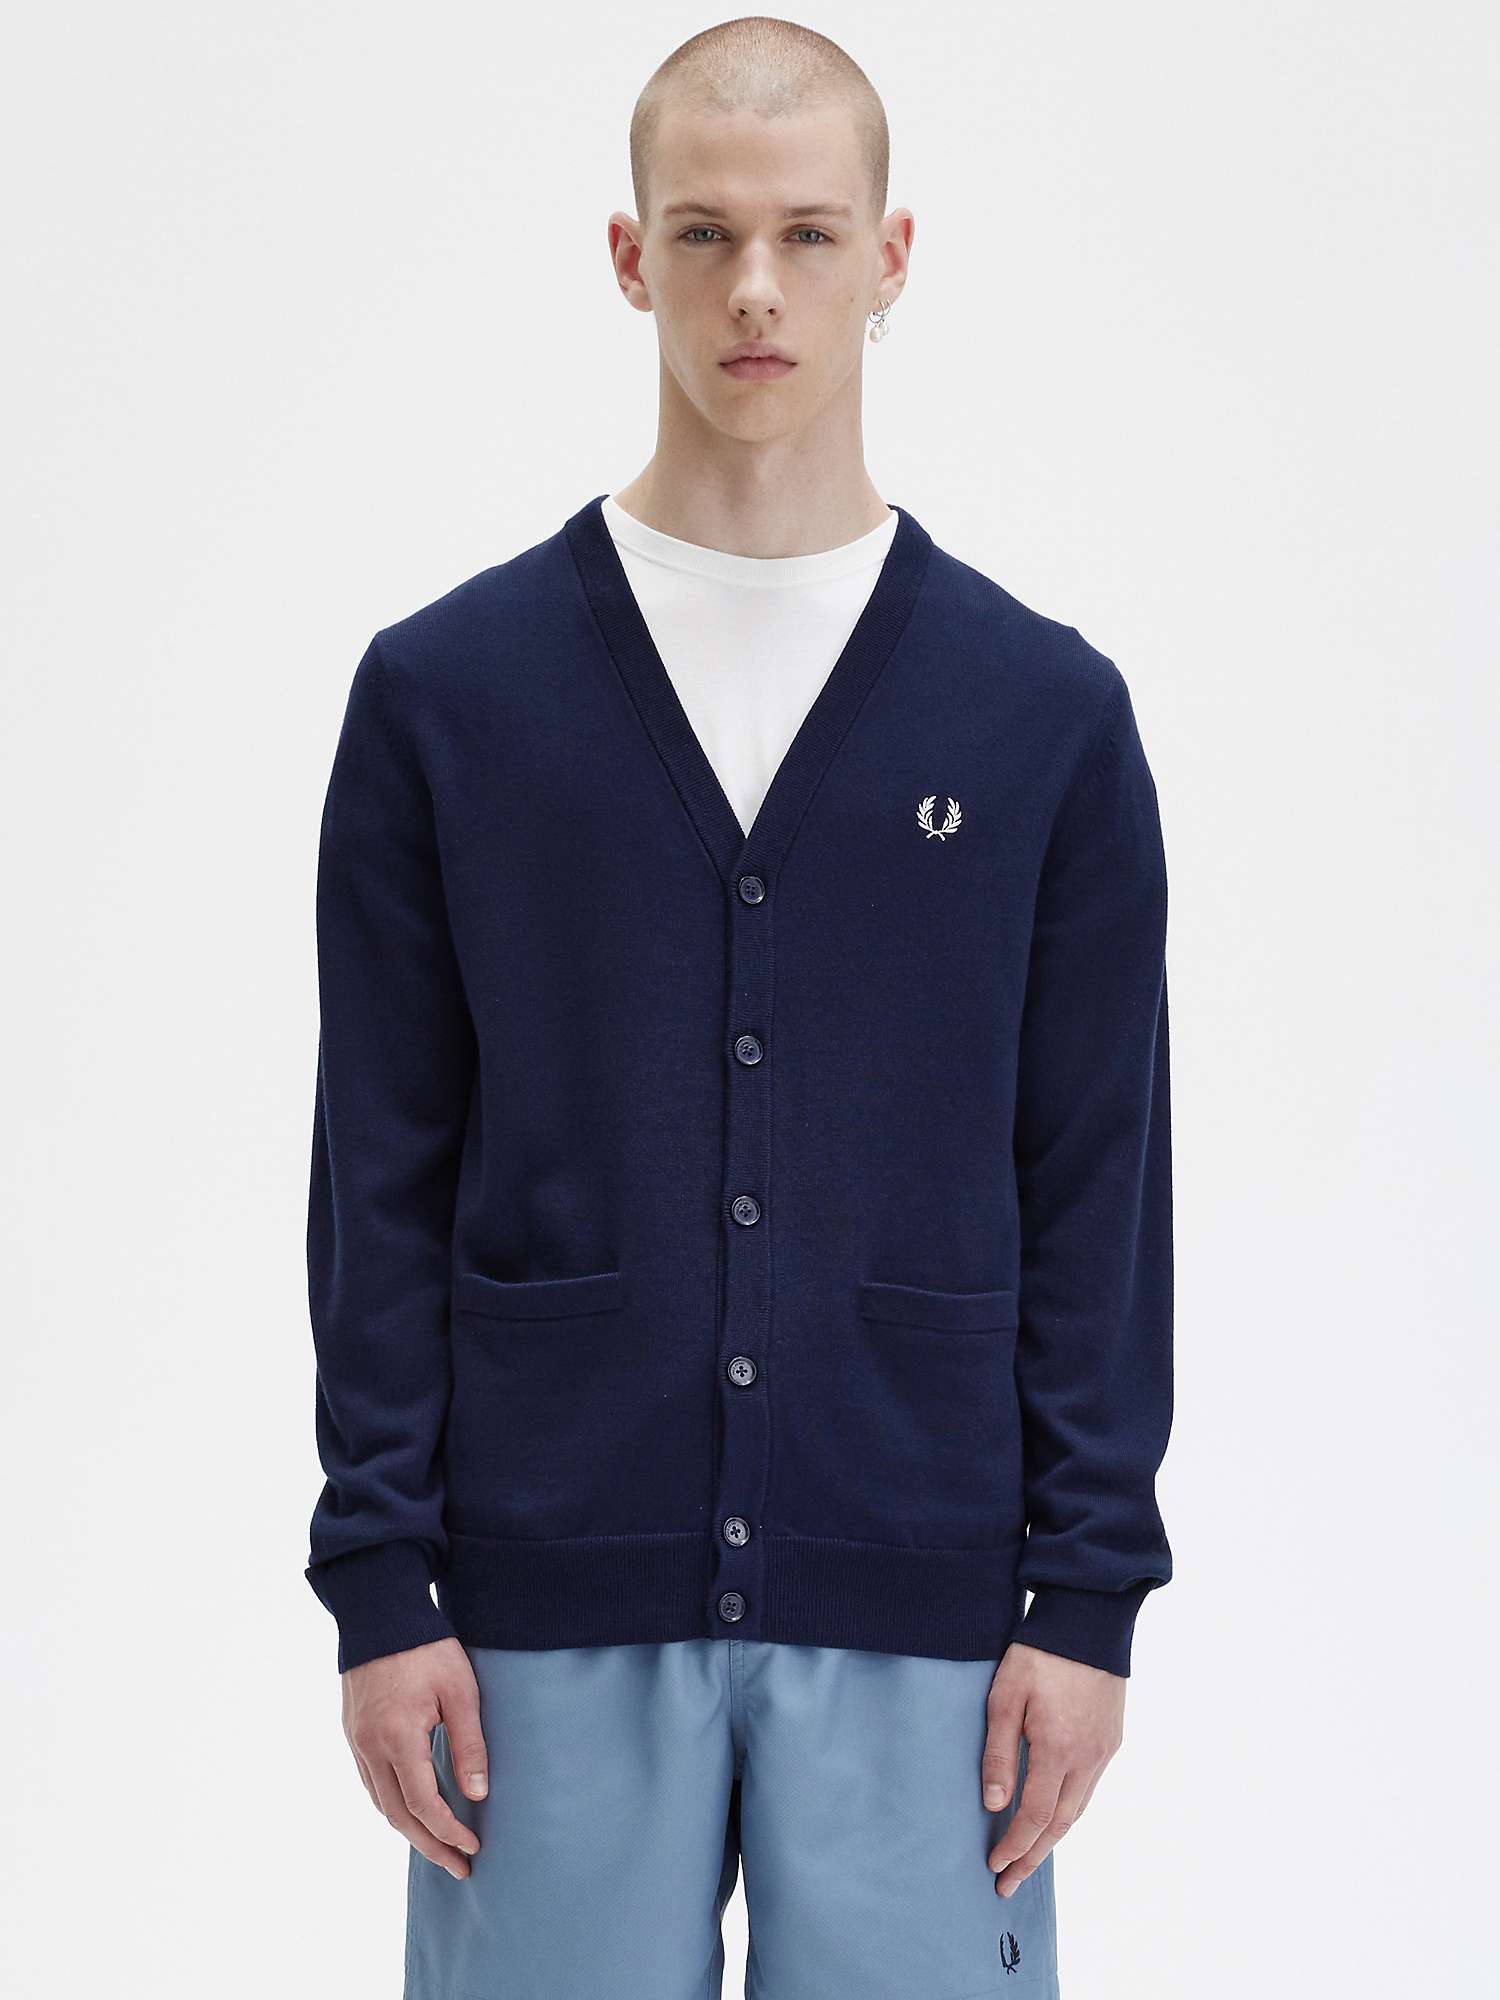 Fred Perry Classic Cardigan, Navy at John Lewis & Partners